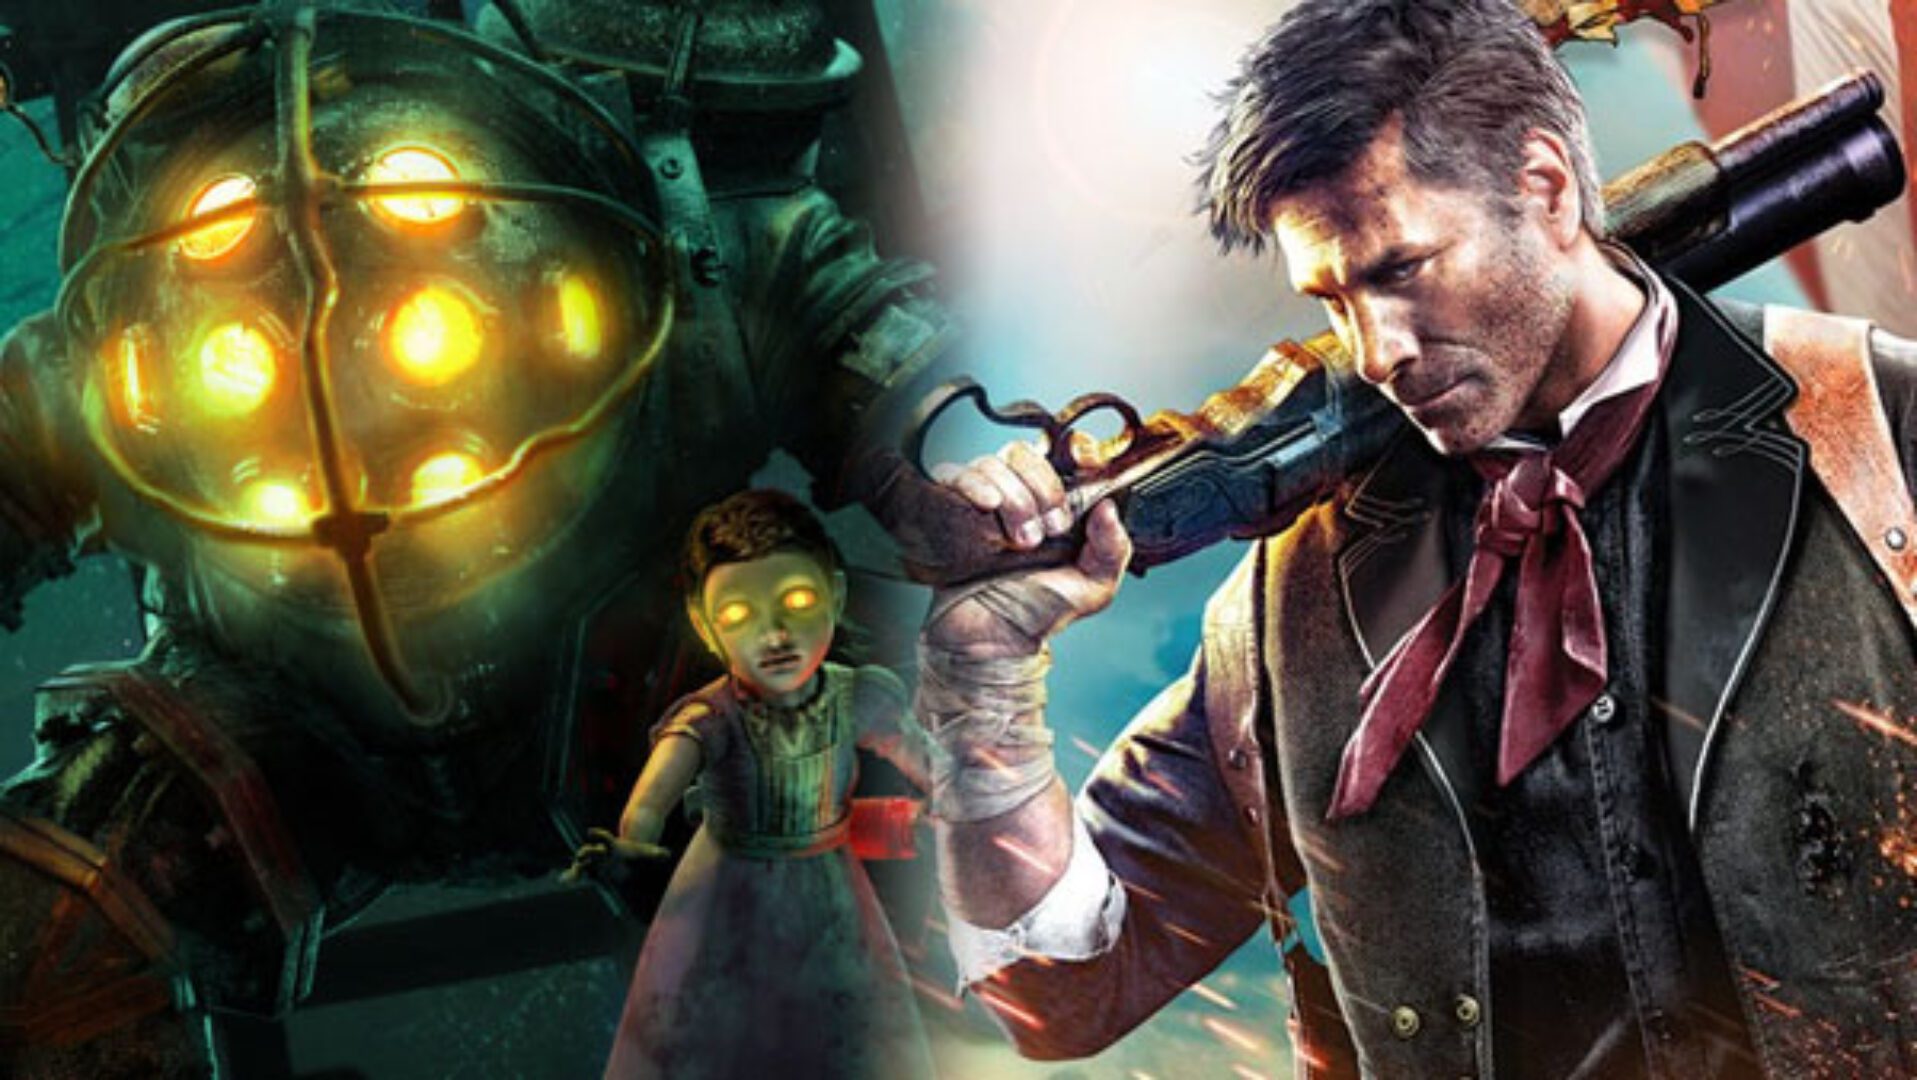 The BioShock Collection Rated for PS4 and Xbox One